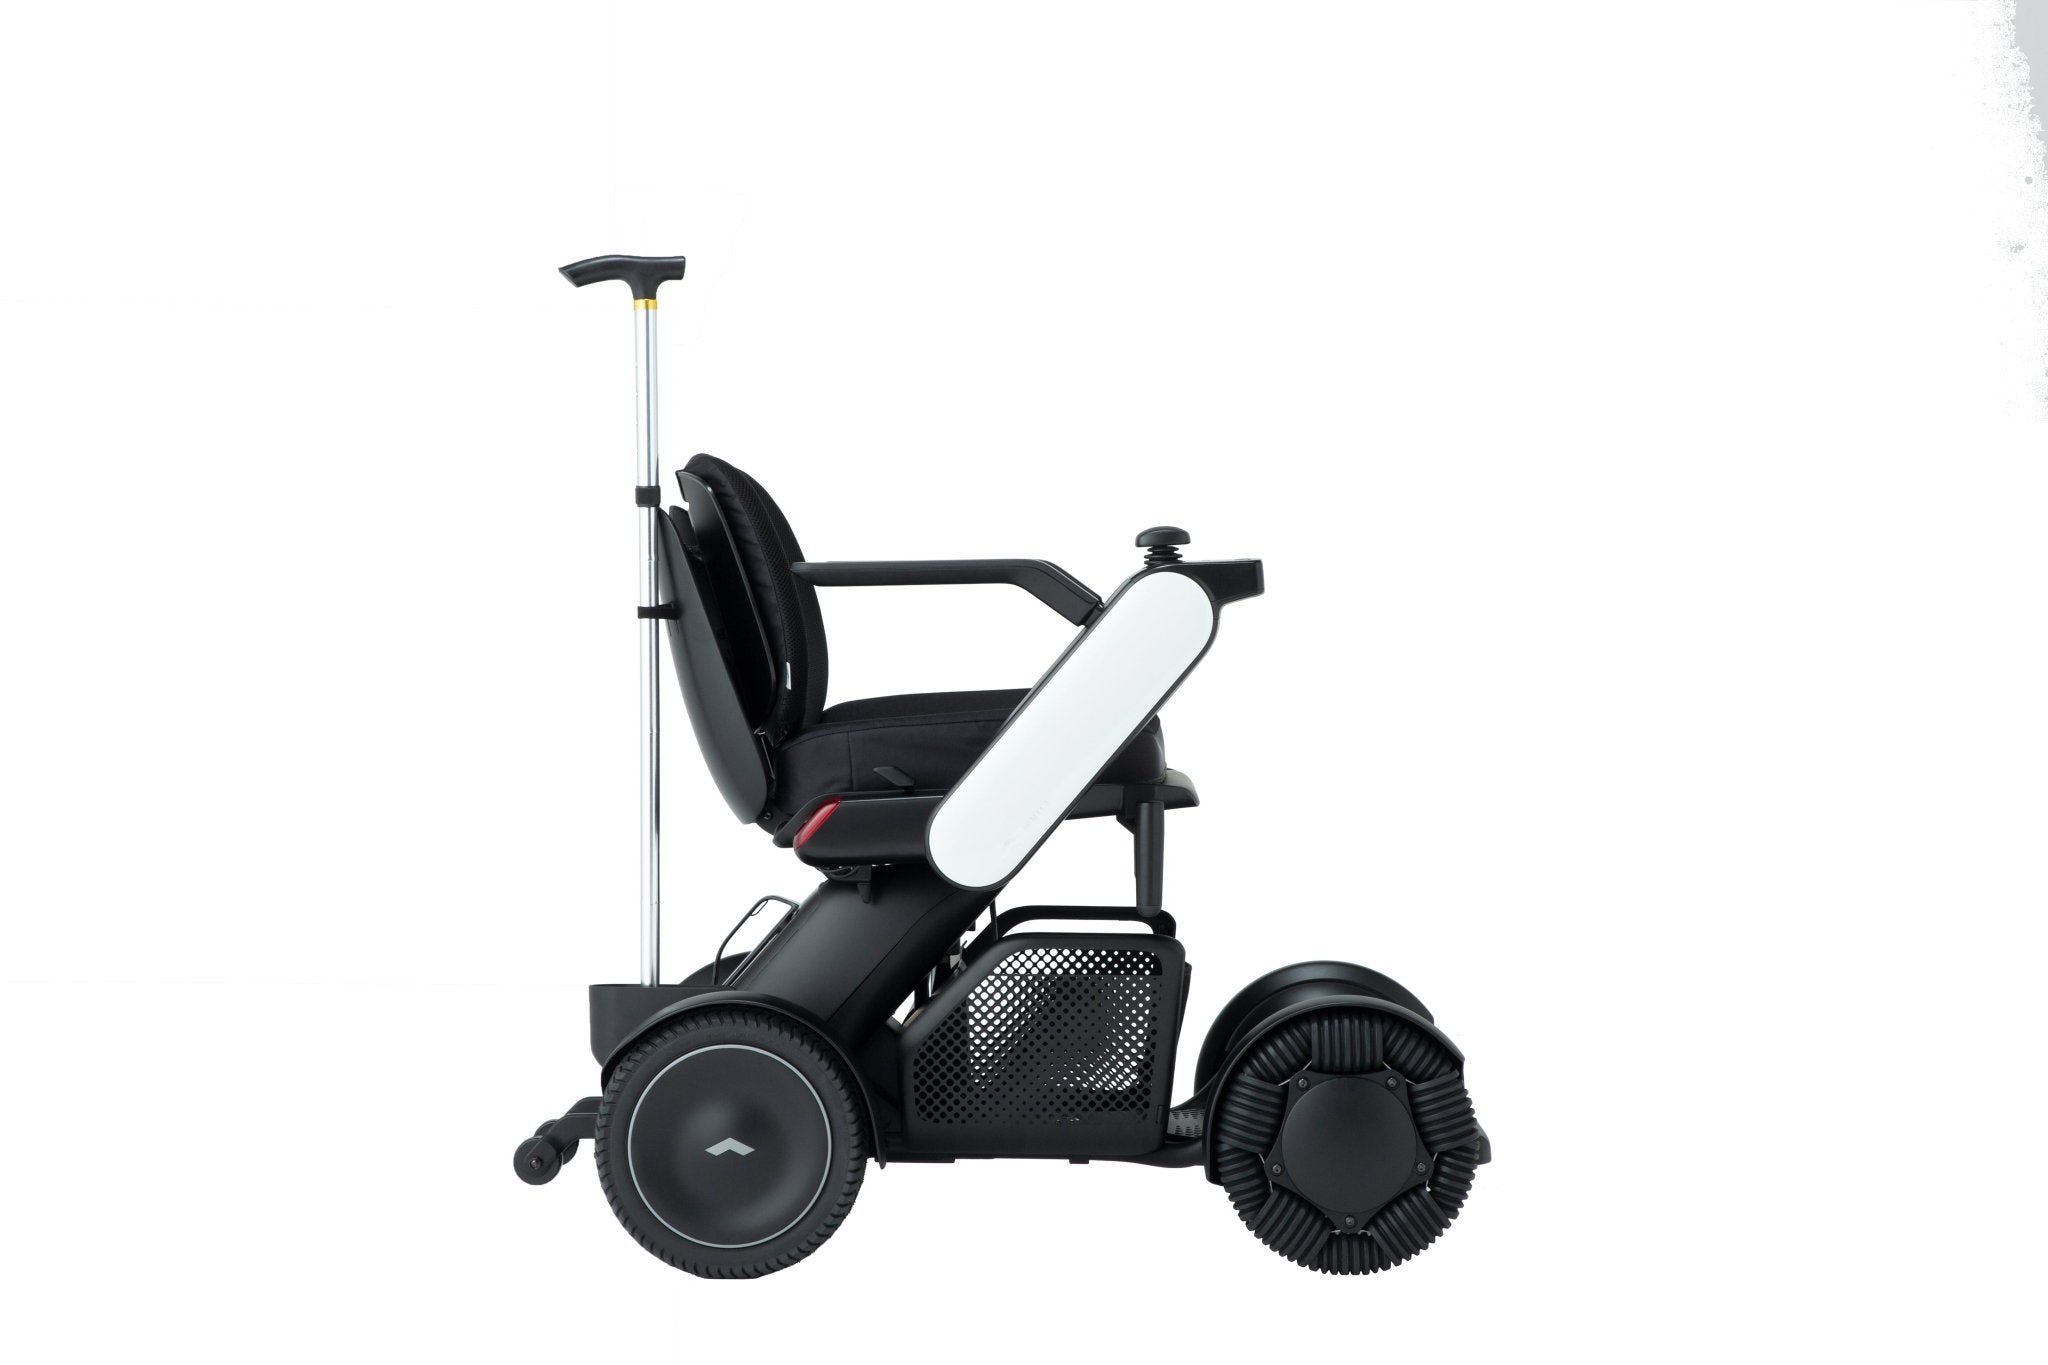 WHILL Model C2 Wheelchair: Portable Electric Power Chair